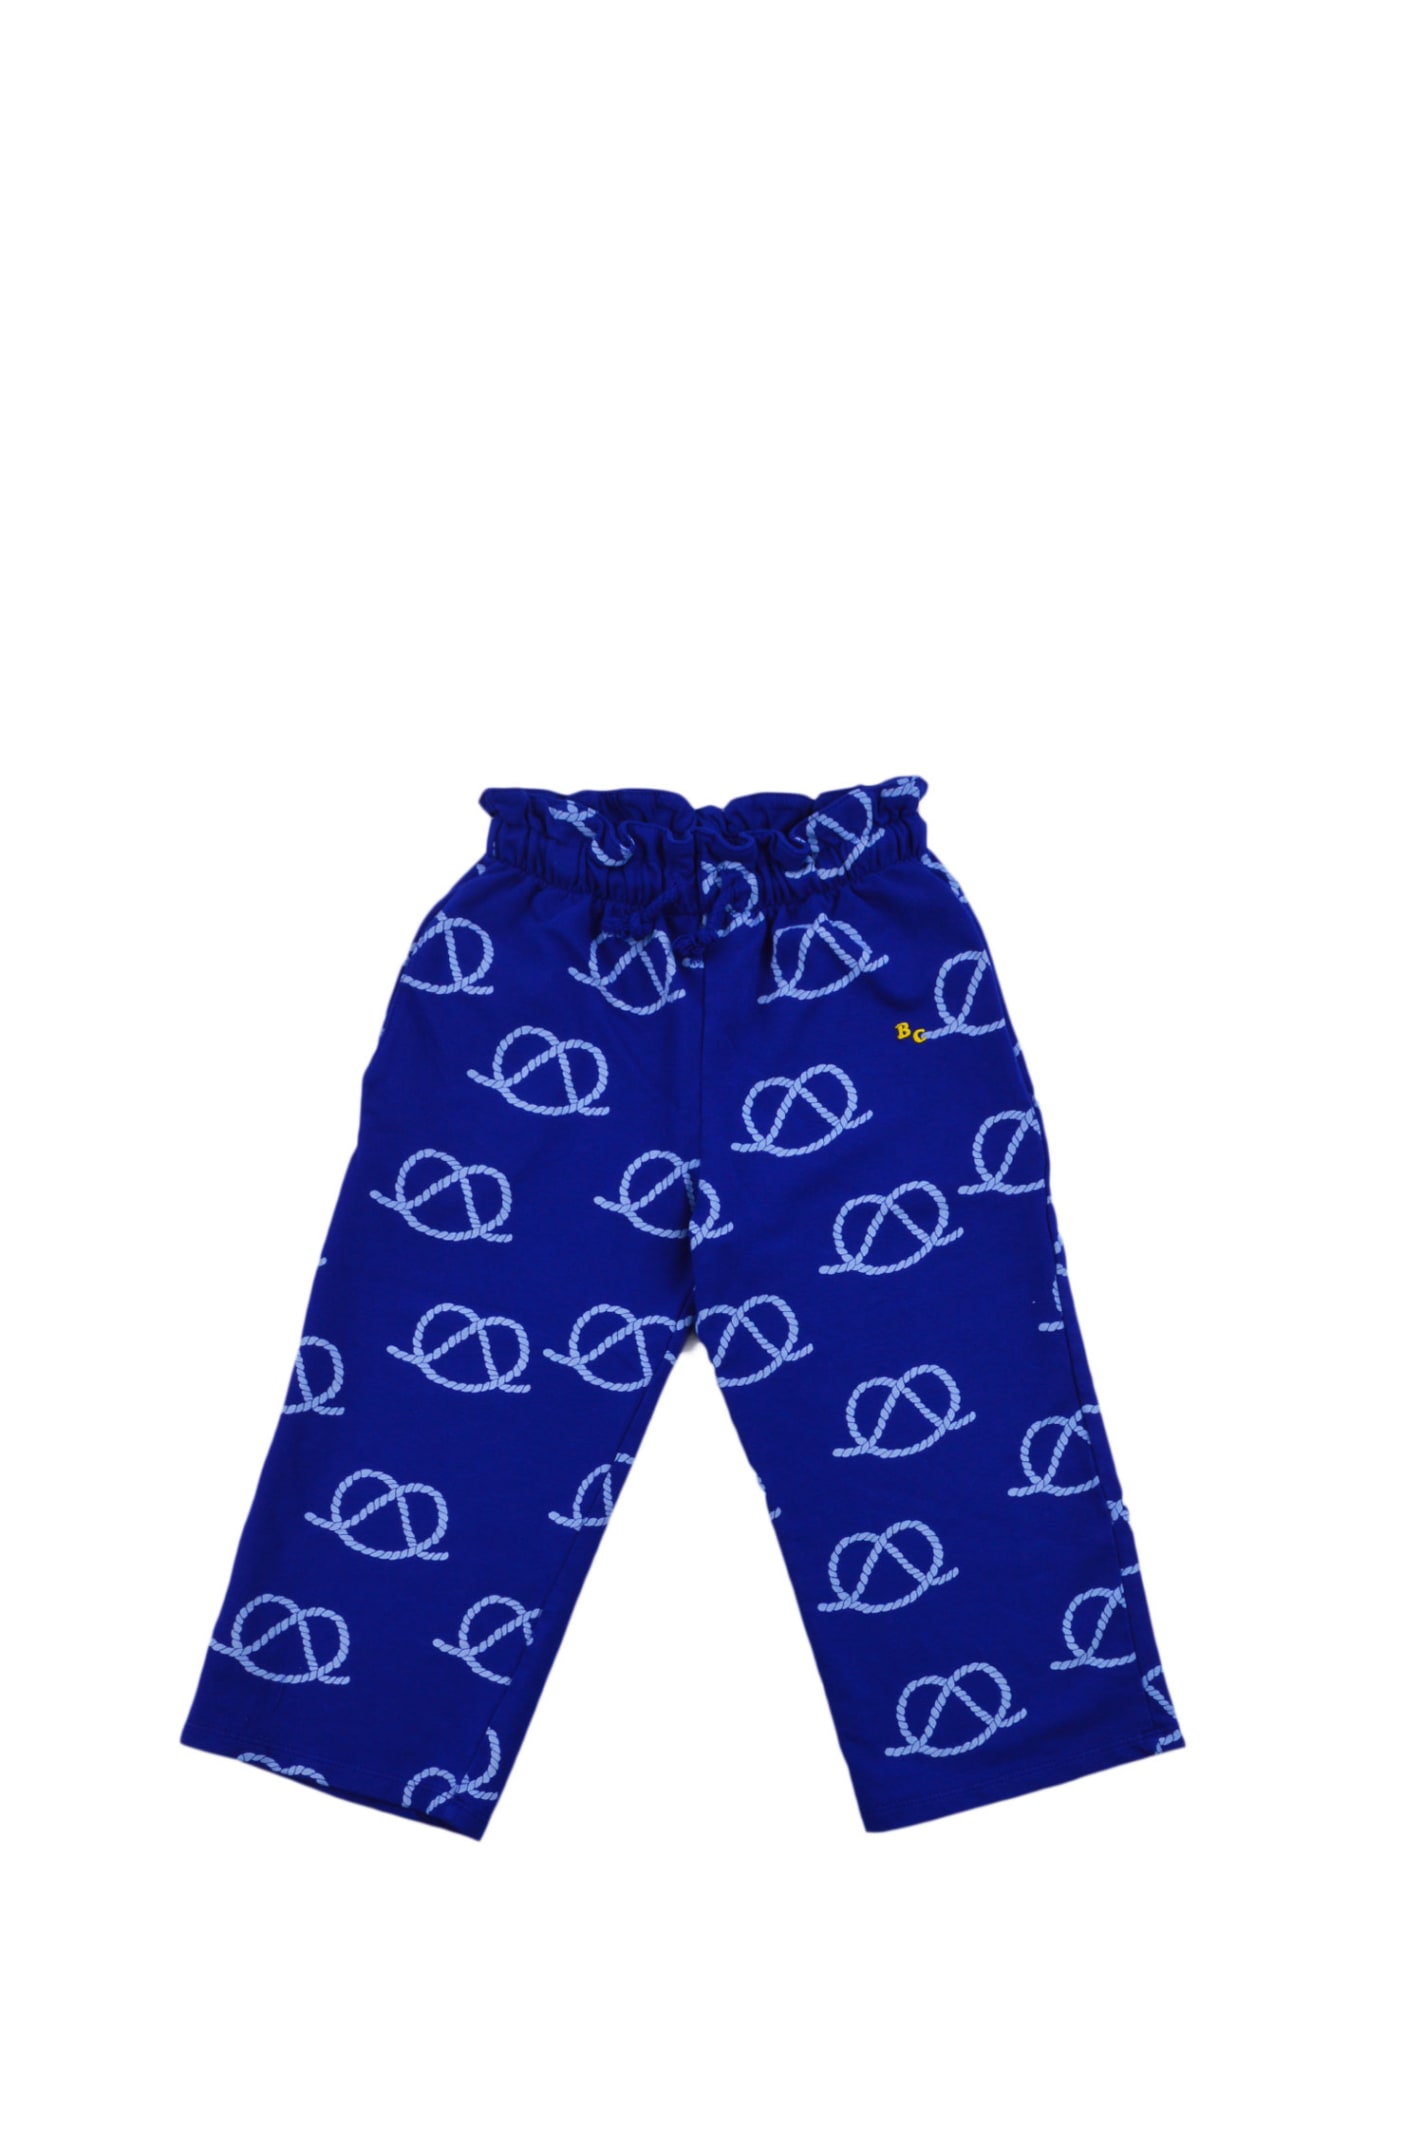 BOBO CHOSES TROUSERS WITH PRINT